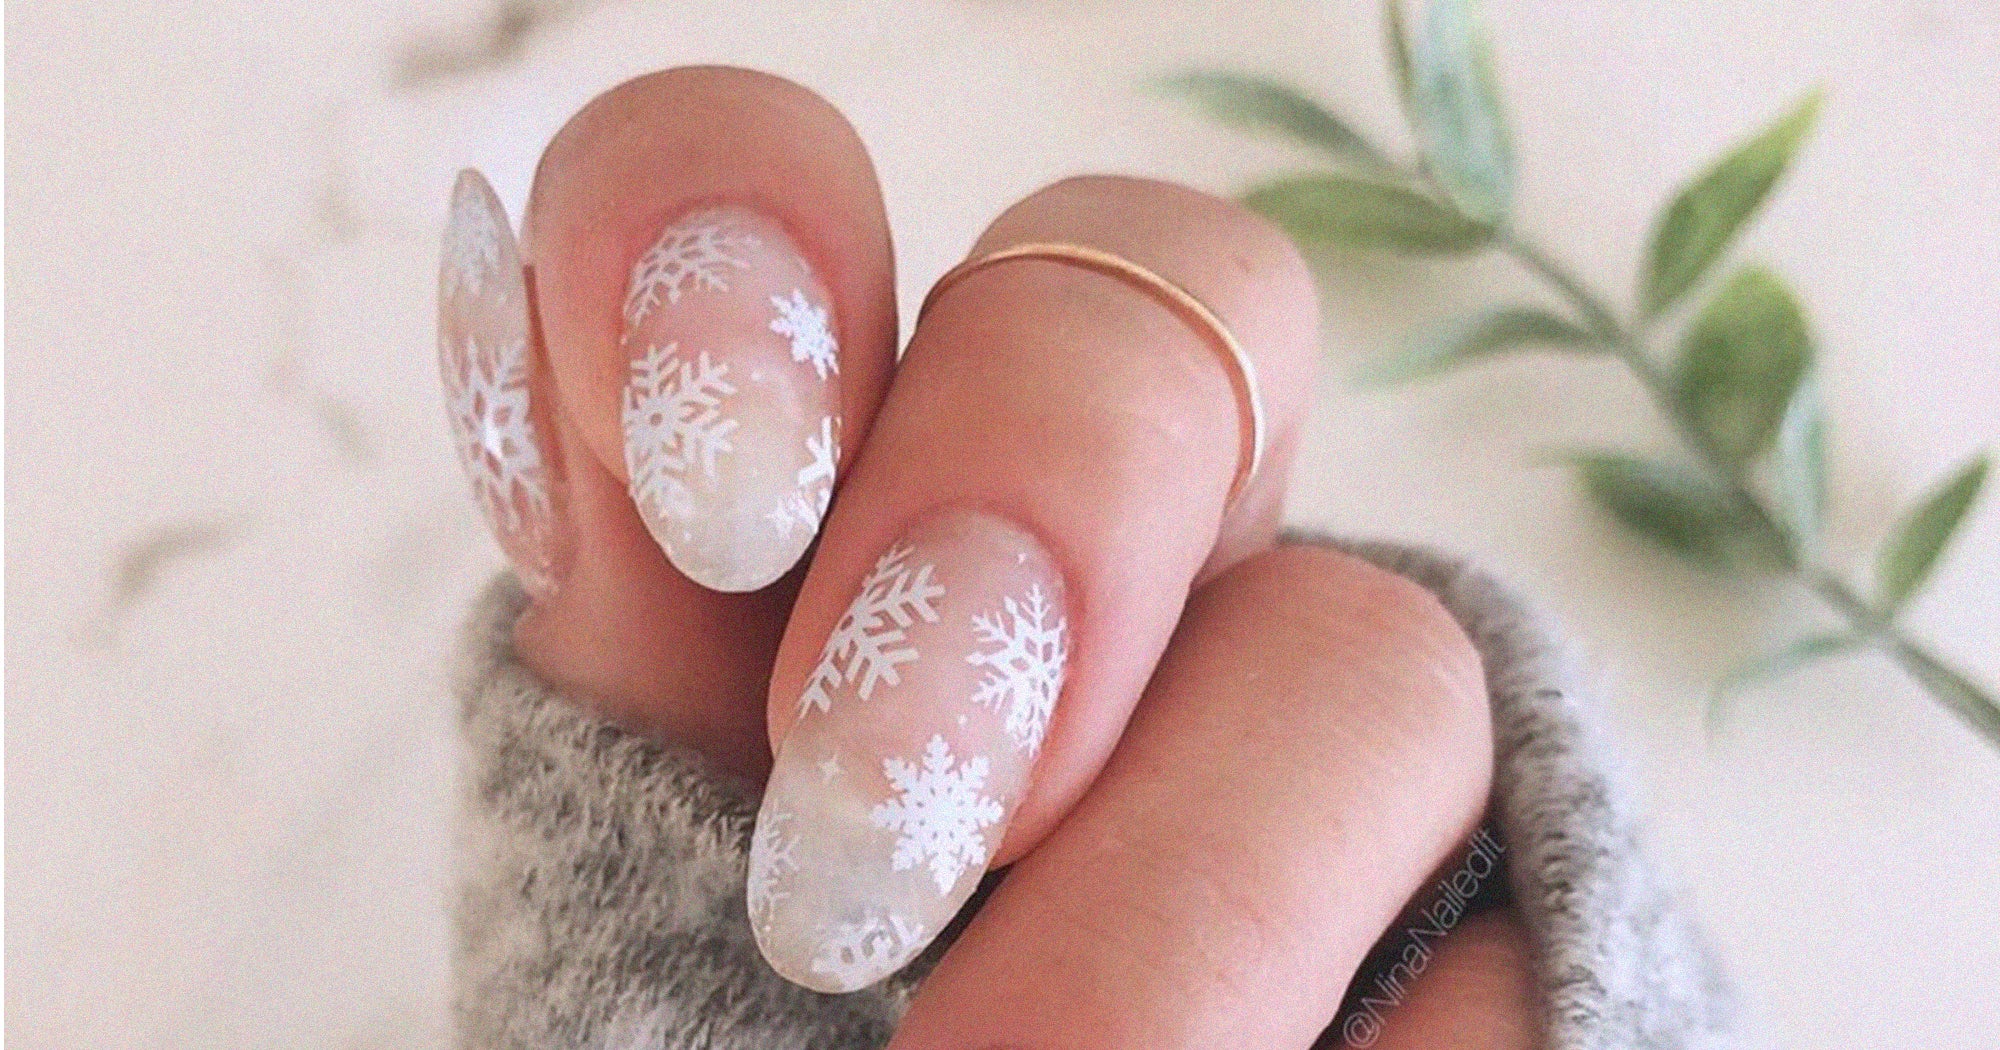 5. "Sparkling Christmas Manicure" - wide 2